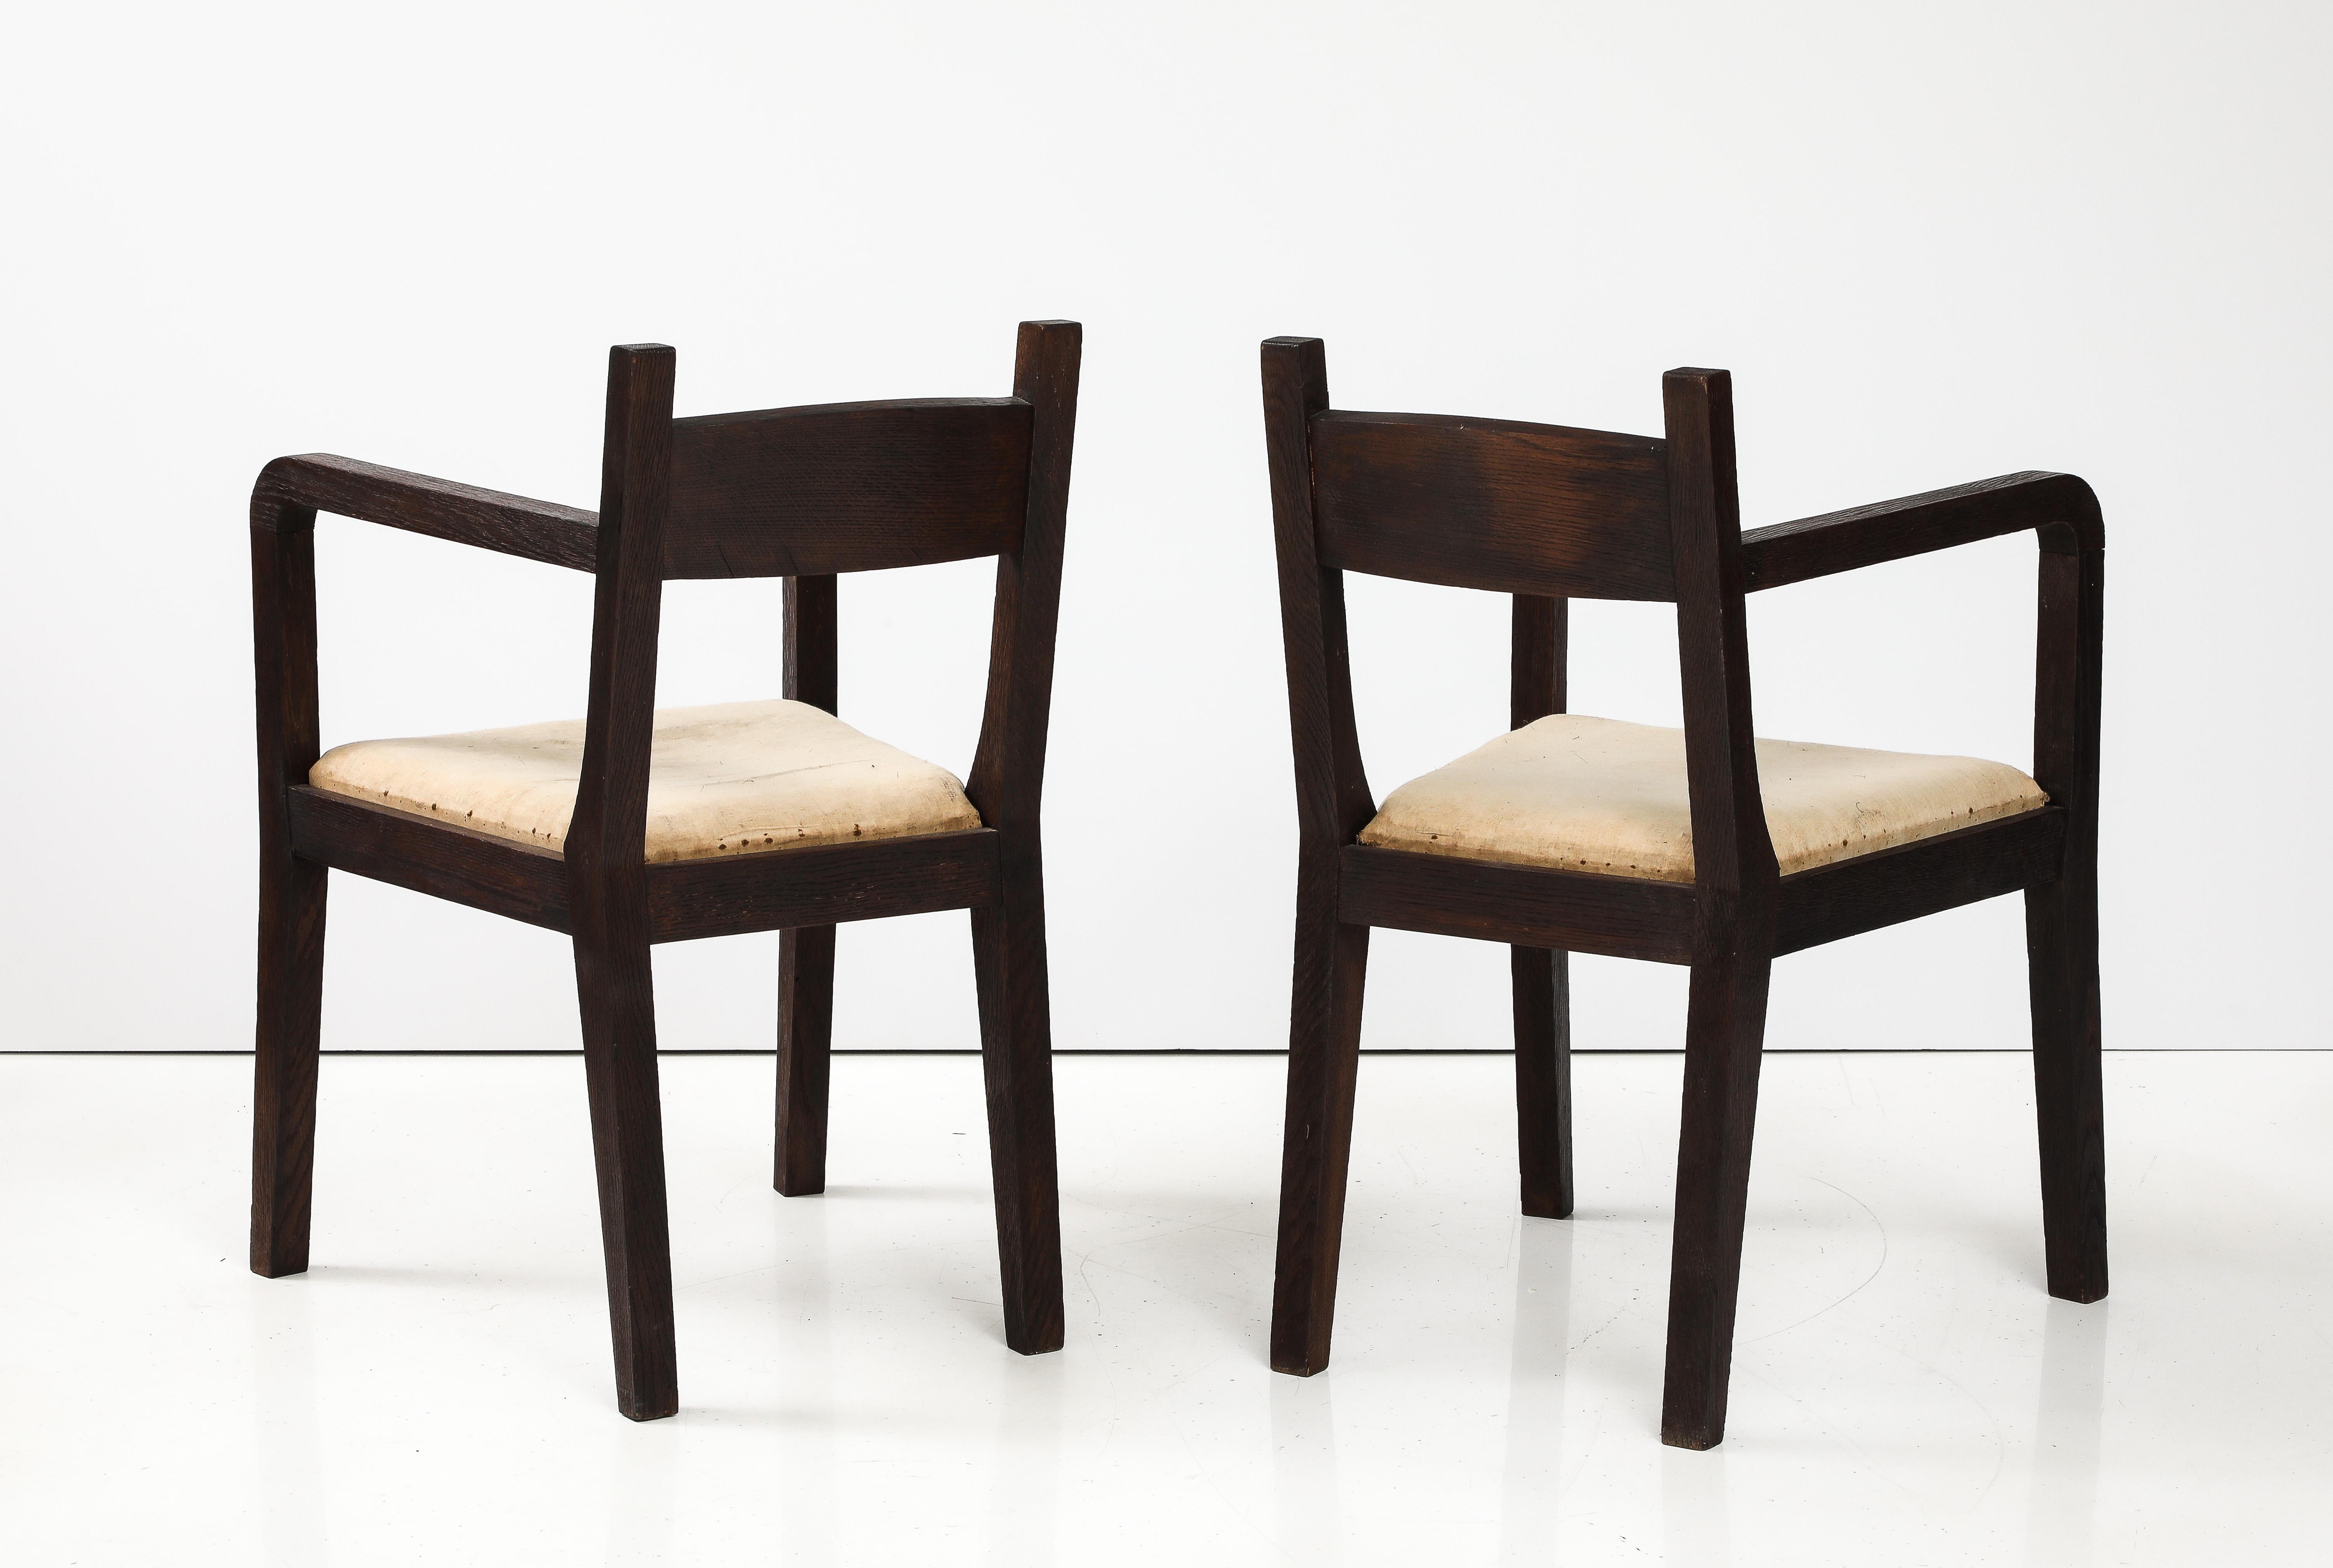 Pair of Modernist Eyre de Lanux Armchairs in Brushed Oak, France, c. 1925 For Sale 8